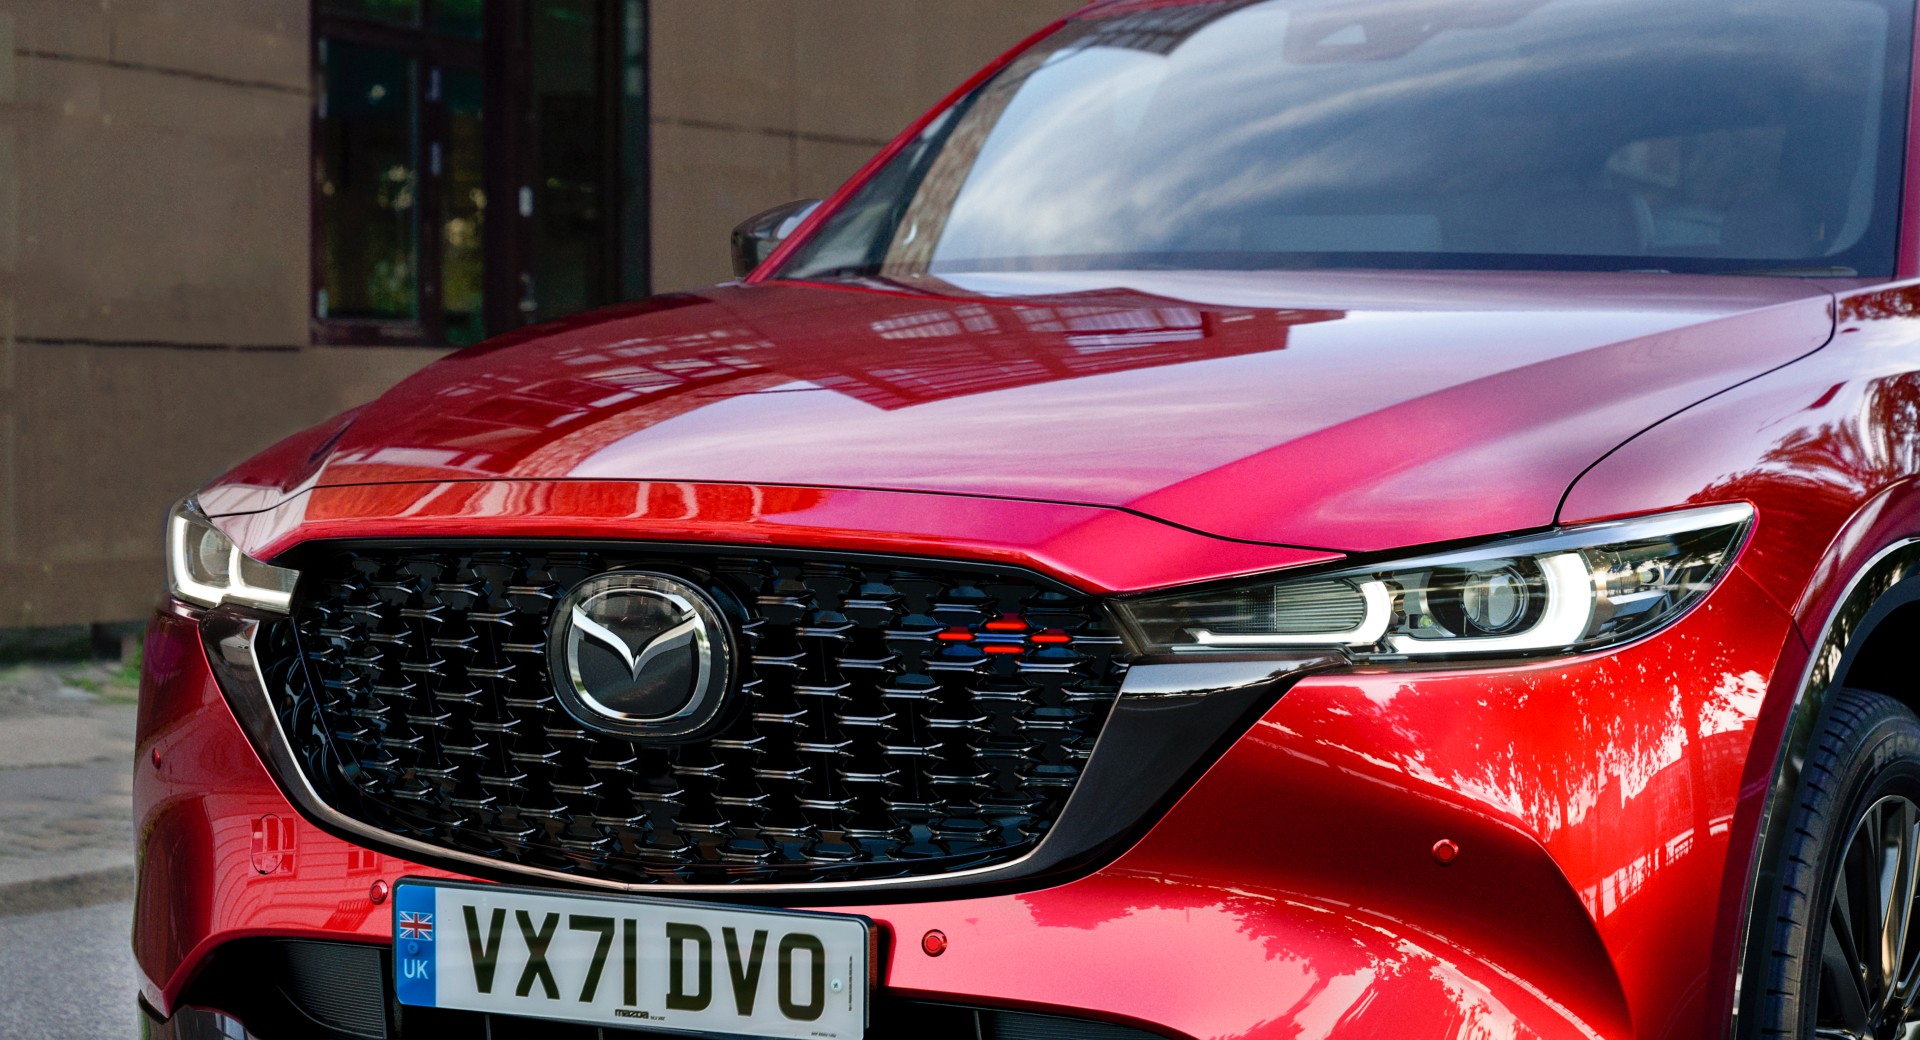 Mazda Confirms 5 New SUVs For 2022 And 2023, Including US-Only CX-50